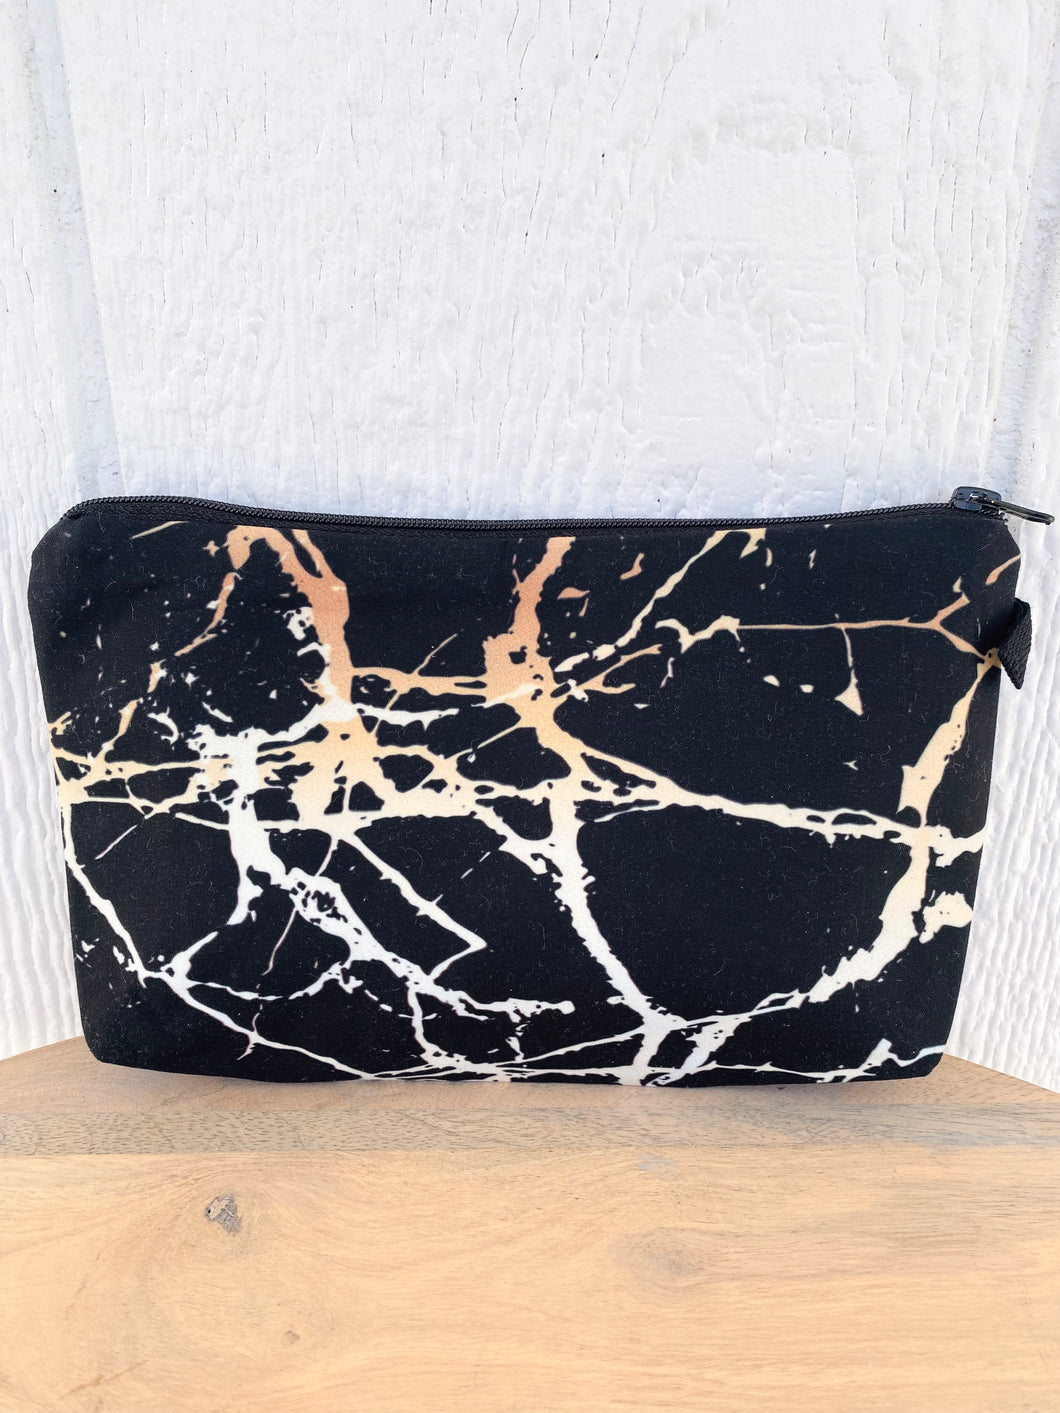 Zipper Pouch, Black and Gold Marble